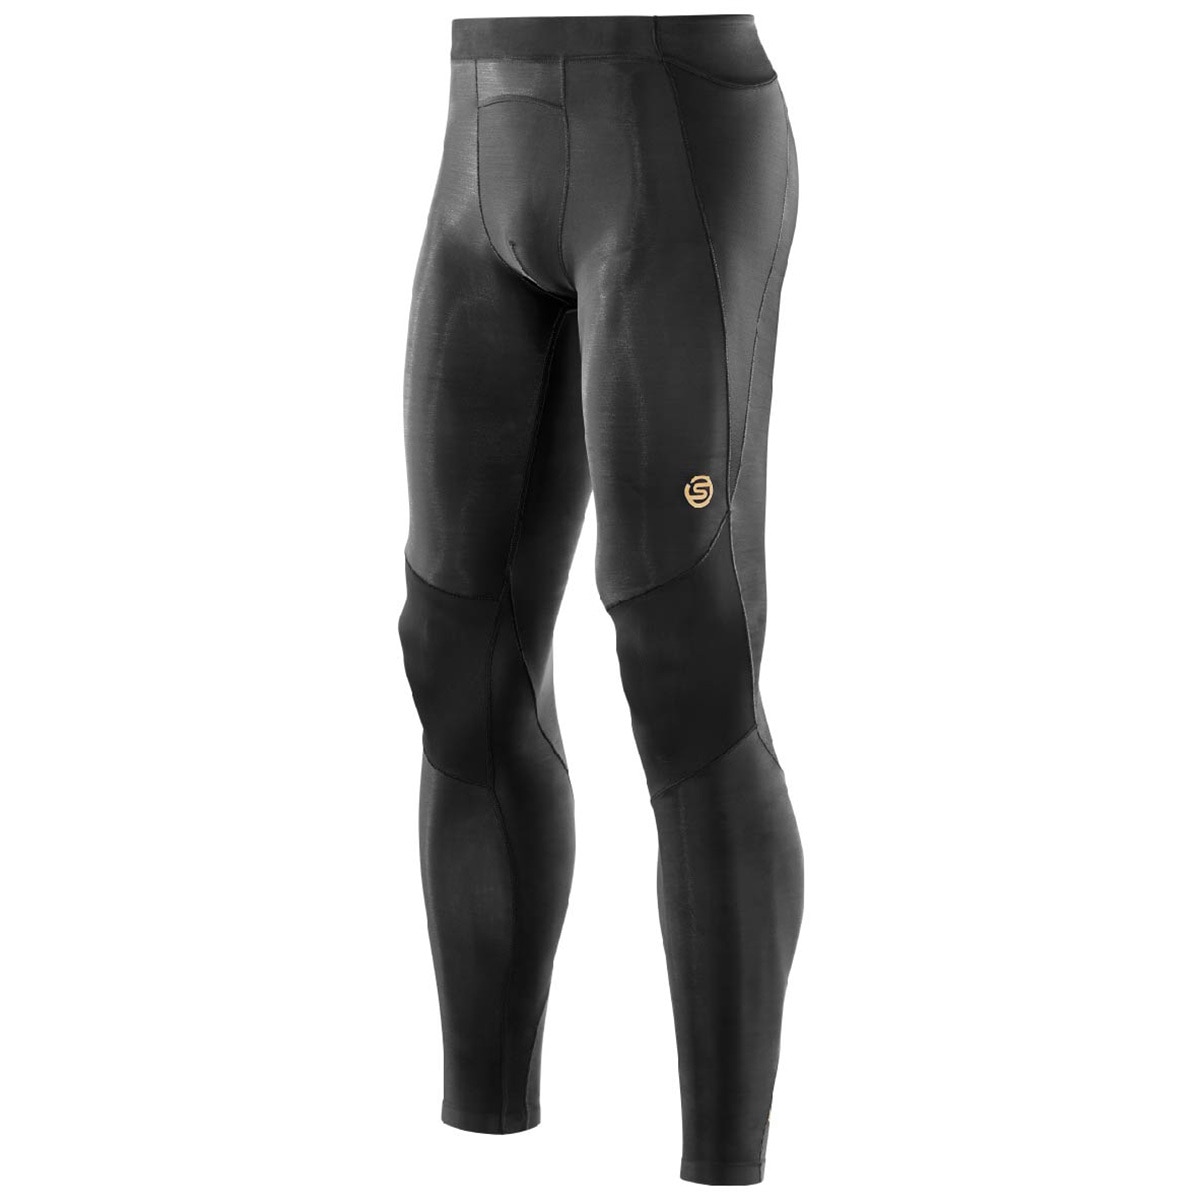 SKINS Women's A400 Compression 3/4 Tights, Black/Gold, Small